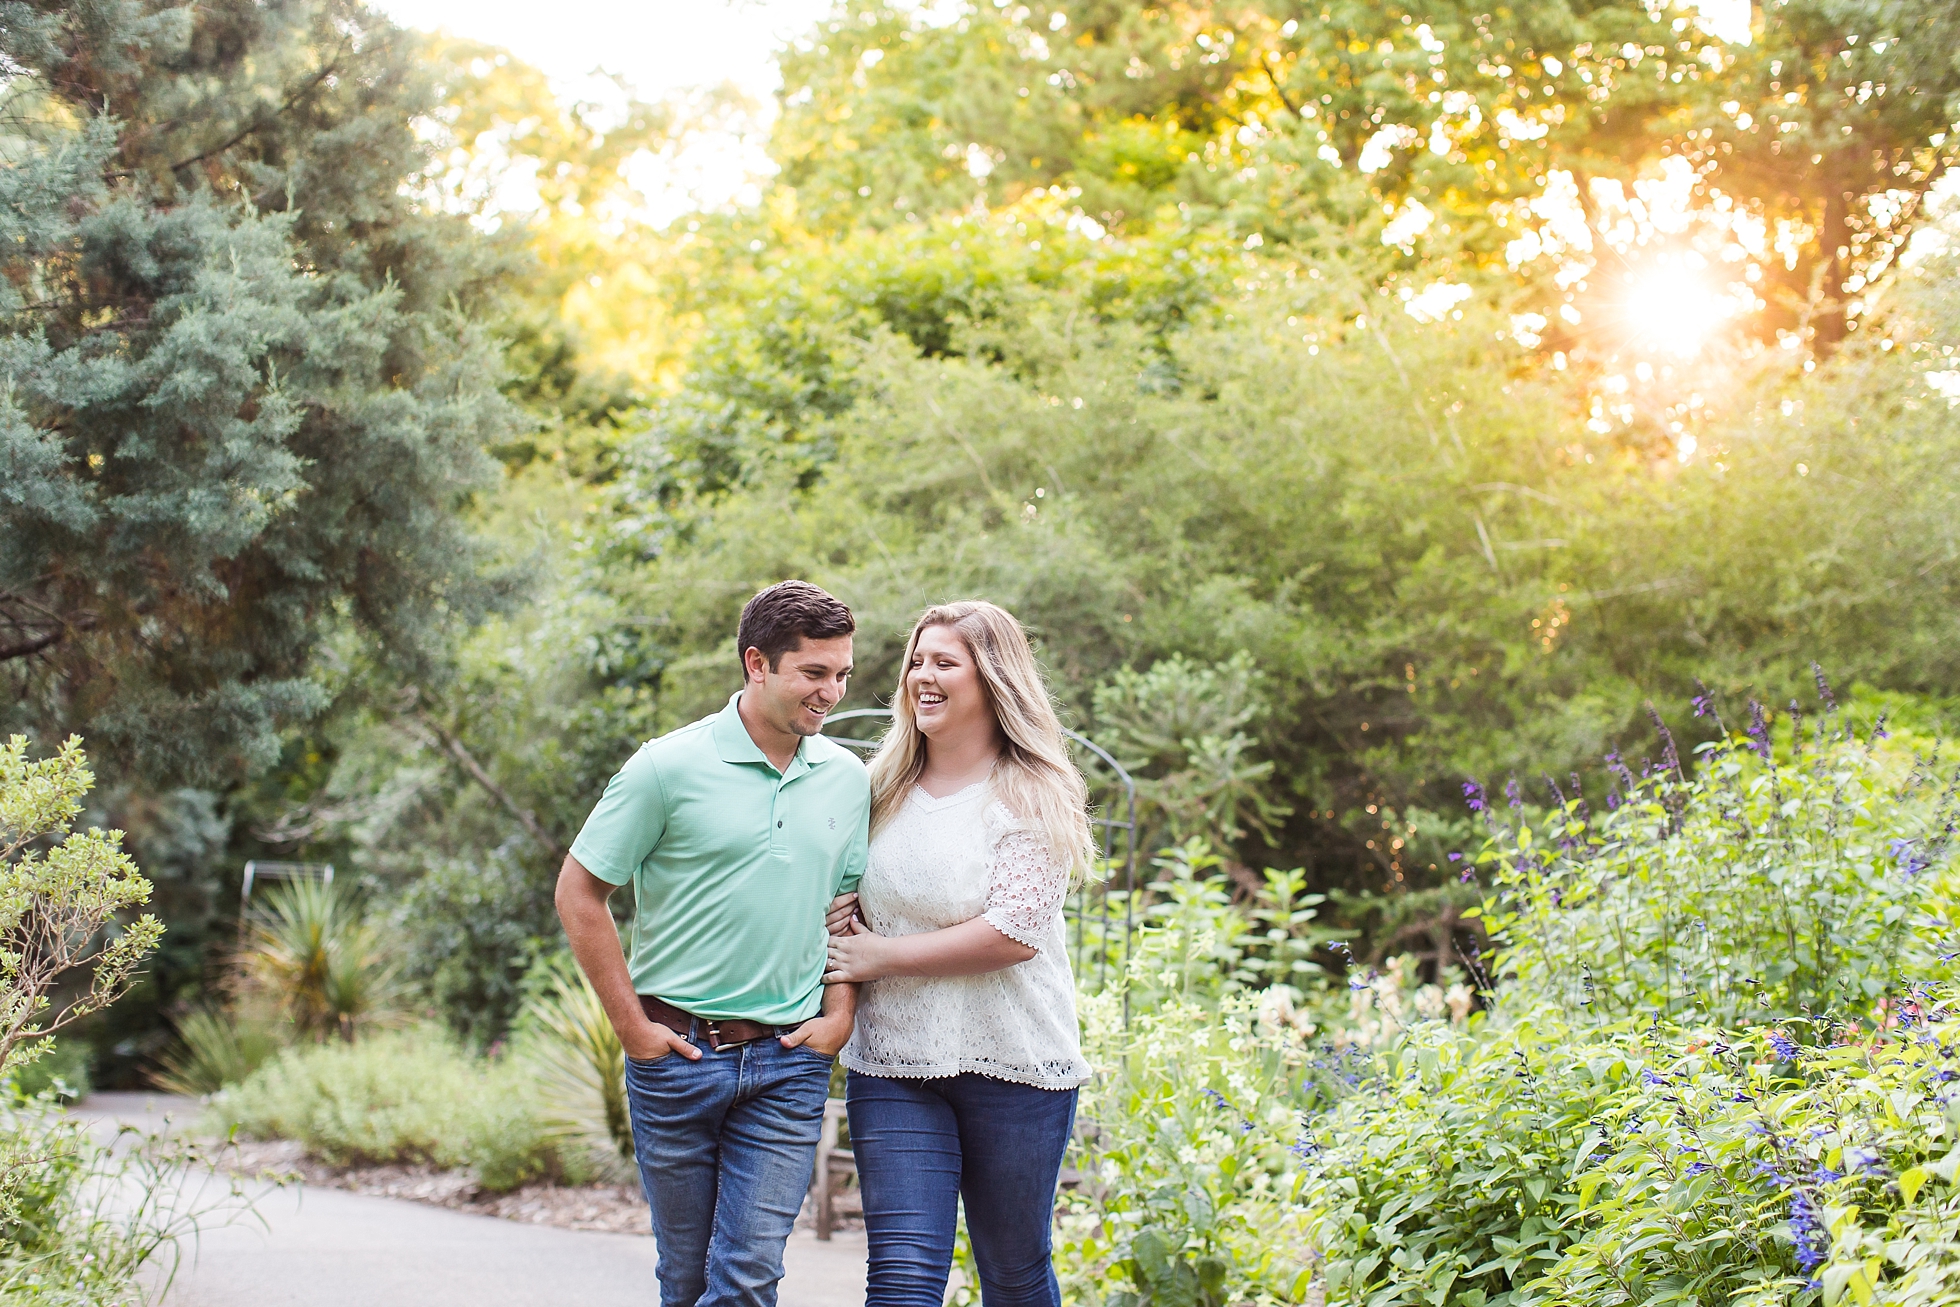 fun candid engagement photography